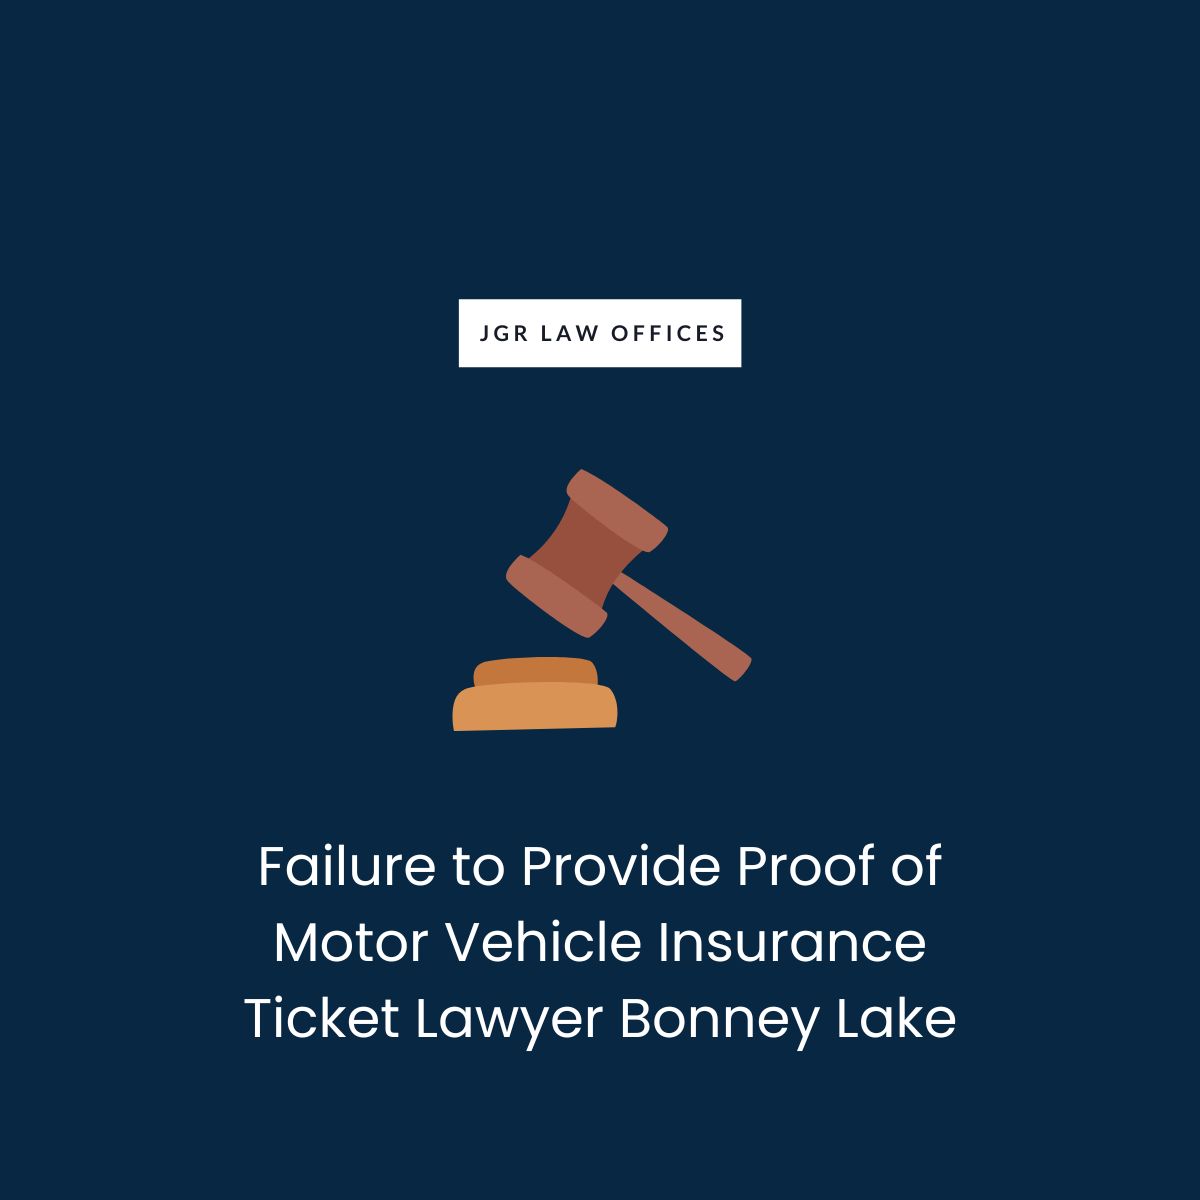 Failure to Provide Proof of Motor Vehicle Insurance Ticket Attorney Bonney Lake